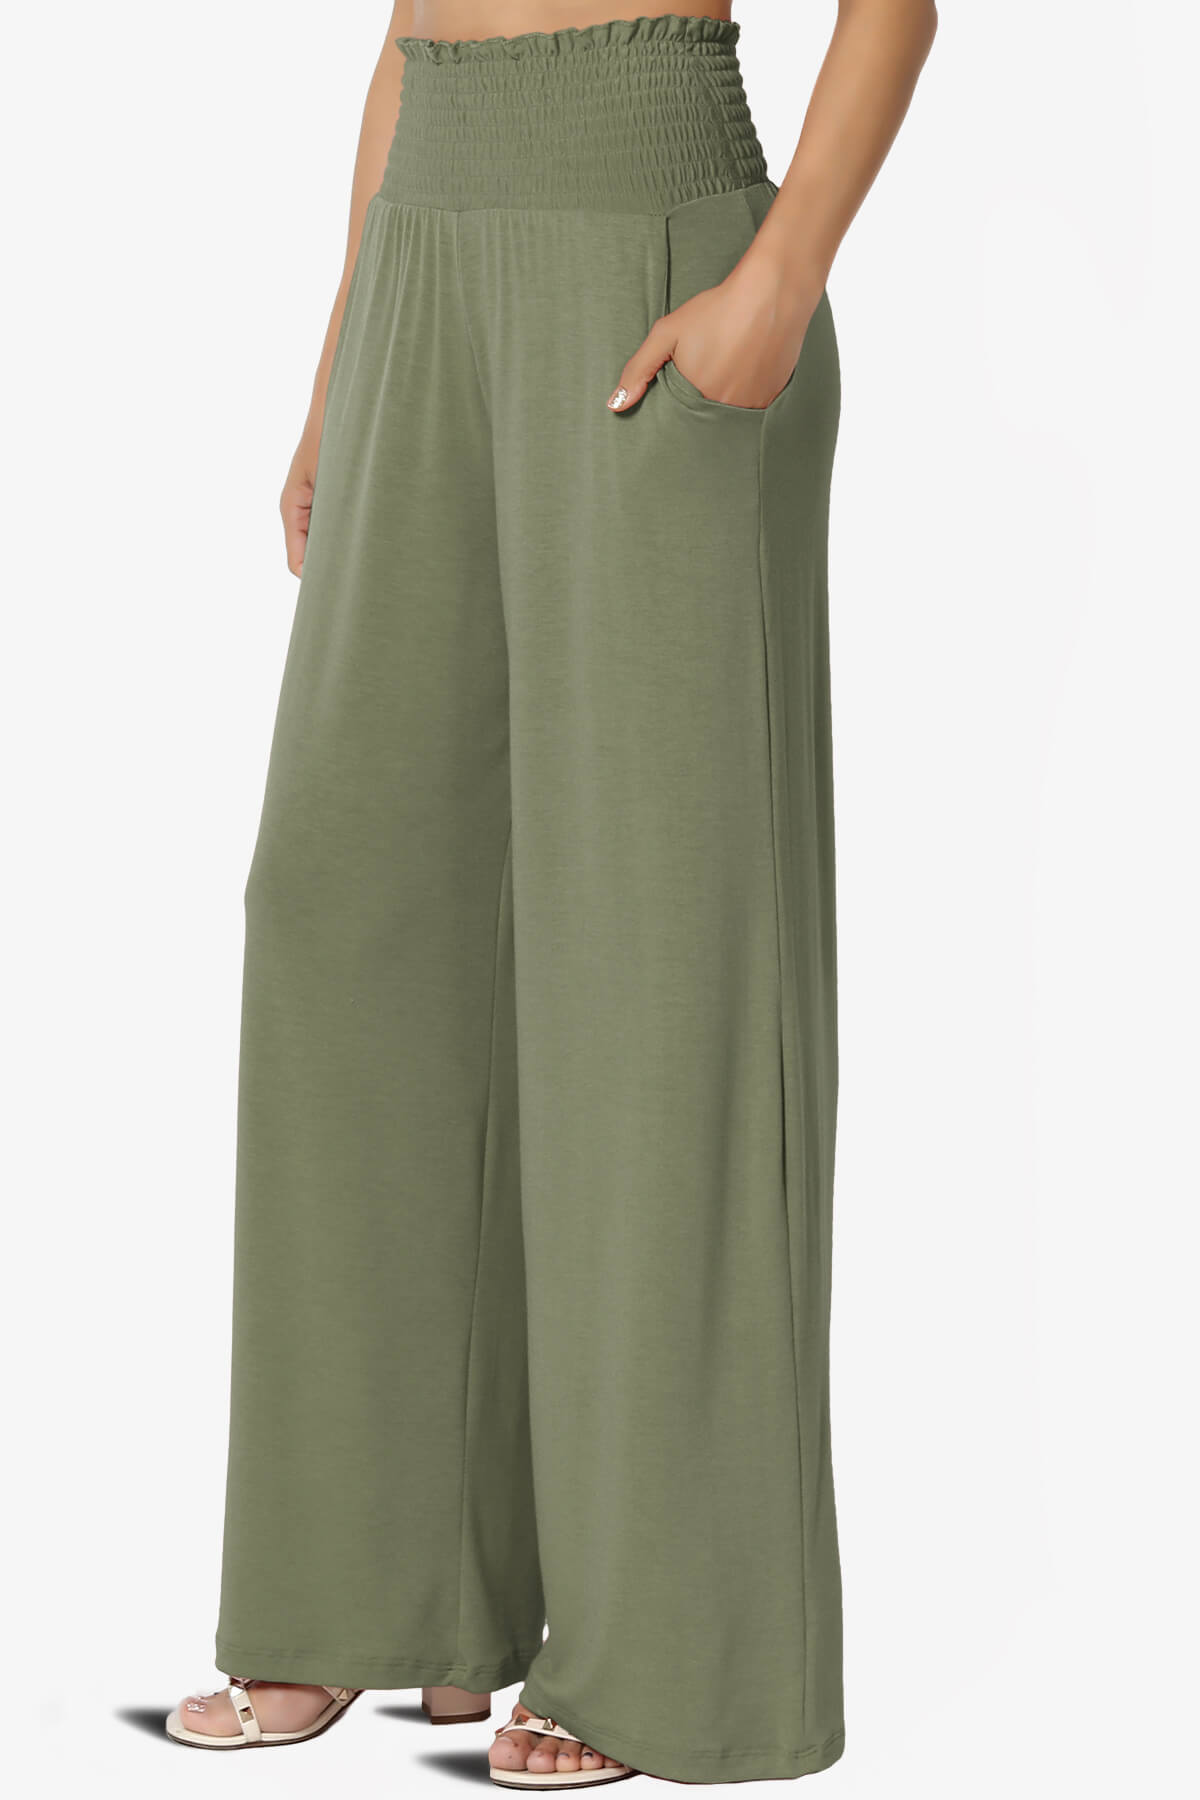 Load image into Gallery viewer, Estella Smocked Waist Lounge Pants DUSTY OLIVE_3
